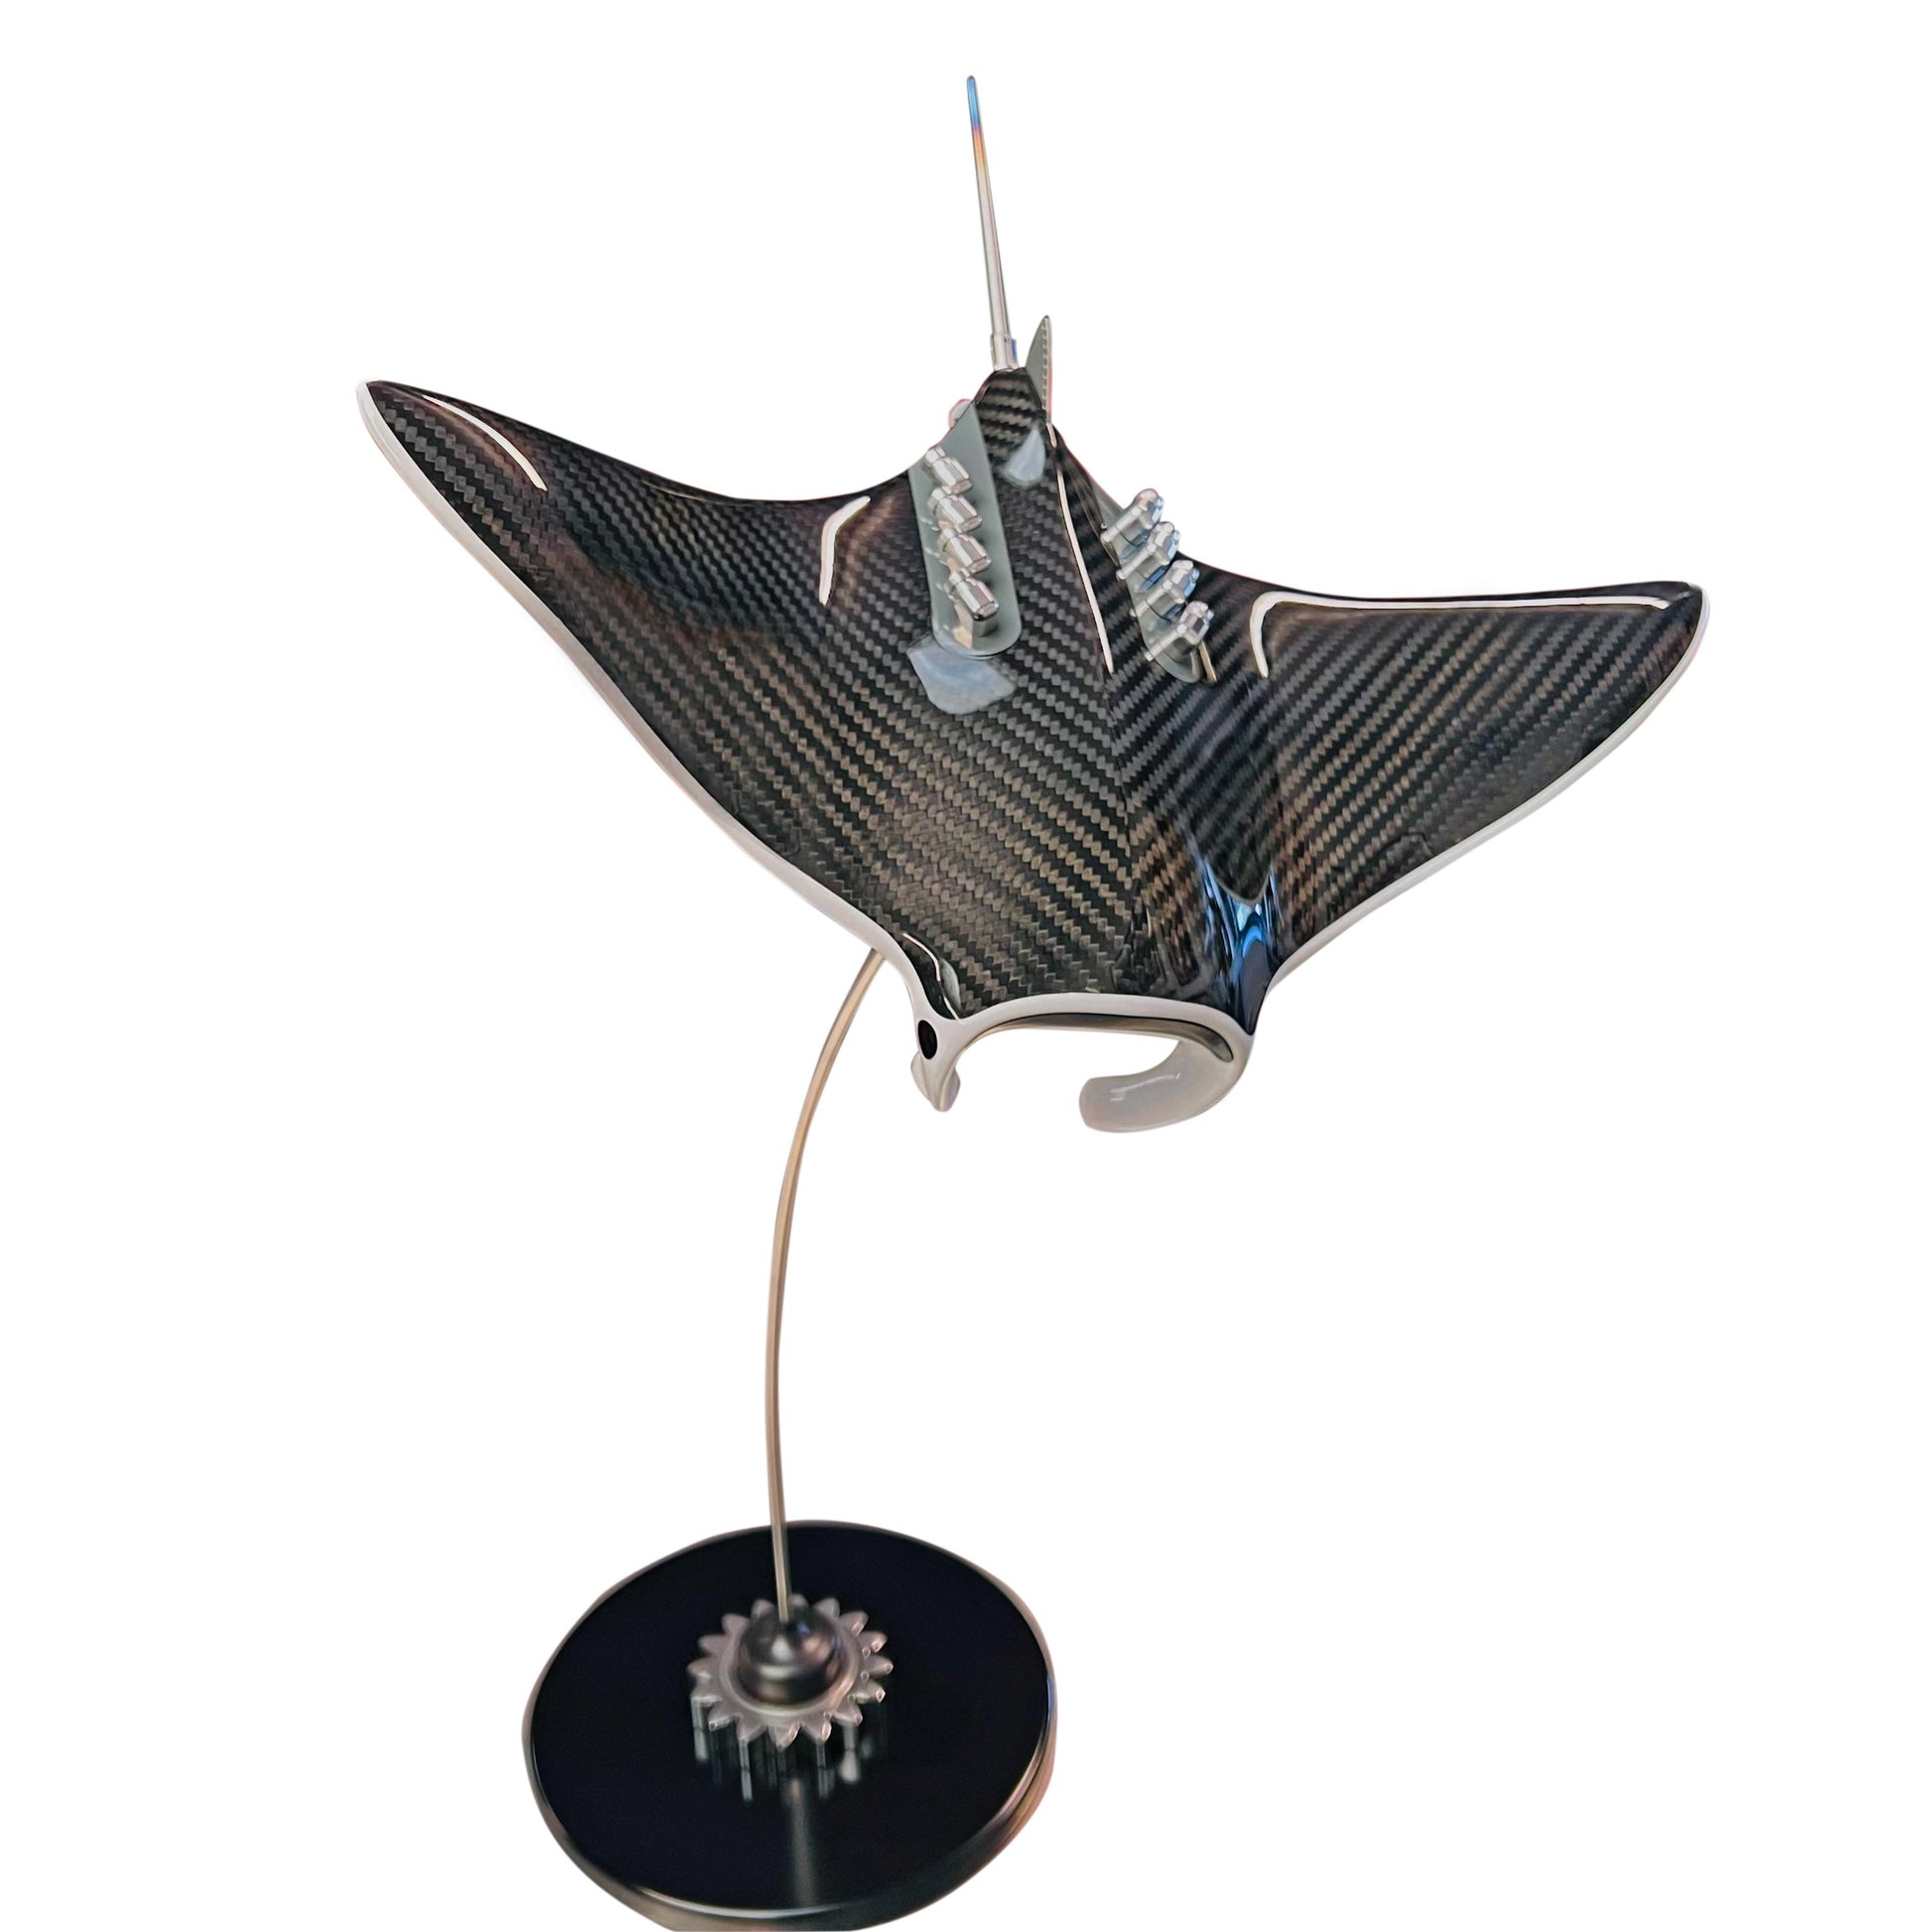 Carbon fibre Manta Ray sculpture on a black base with F1 gear